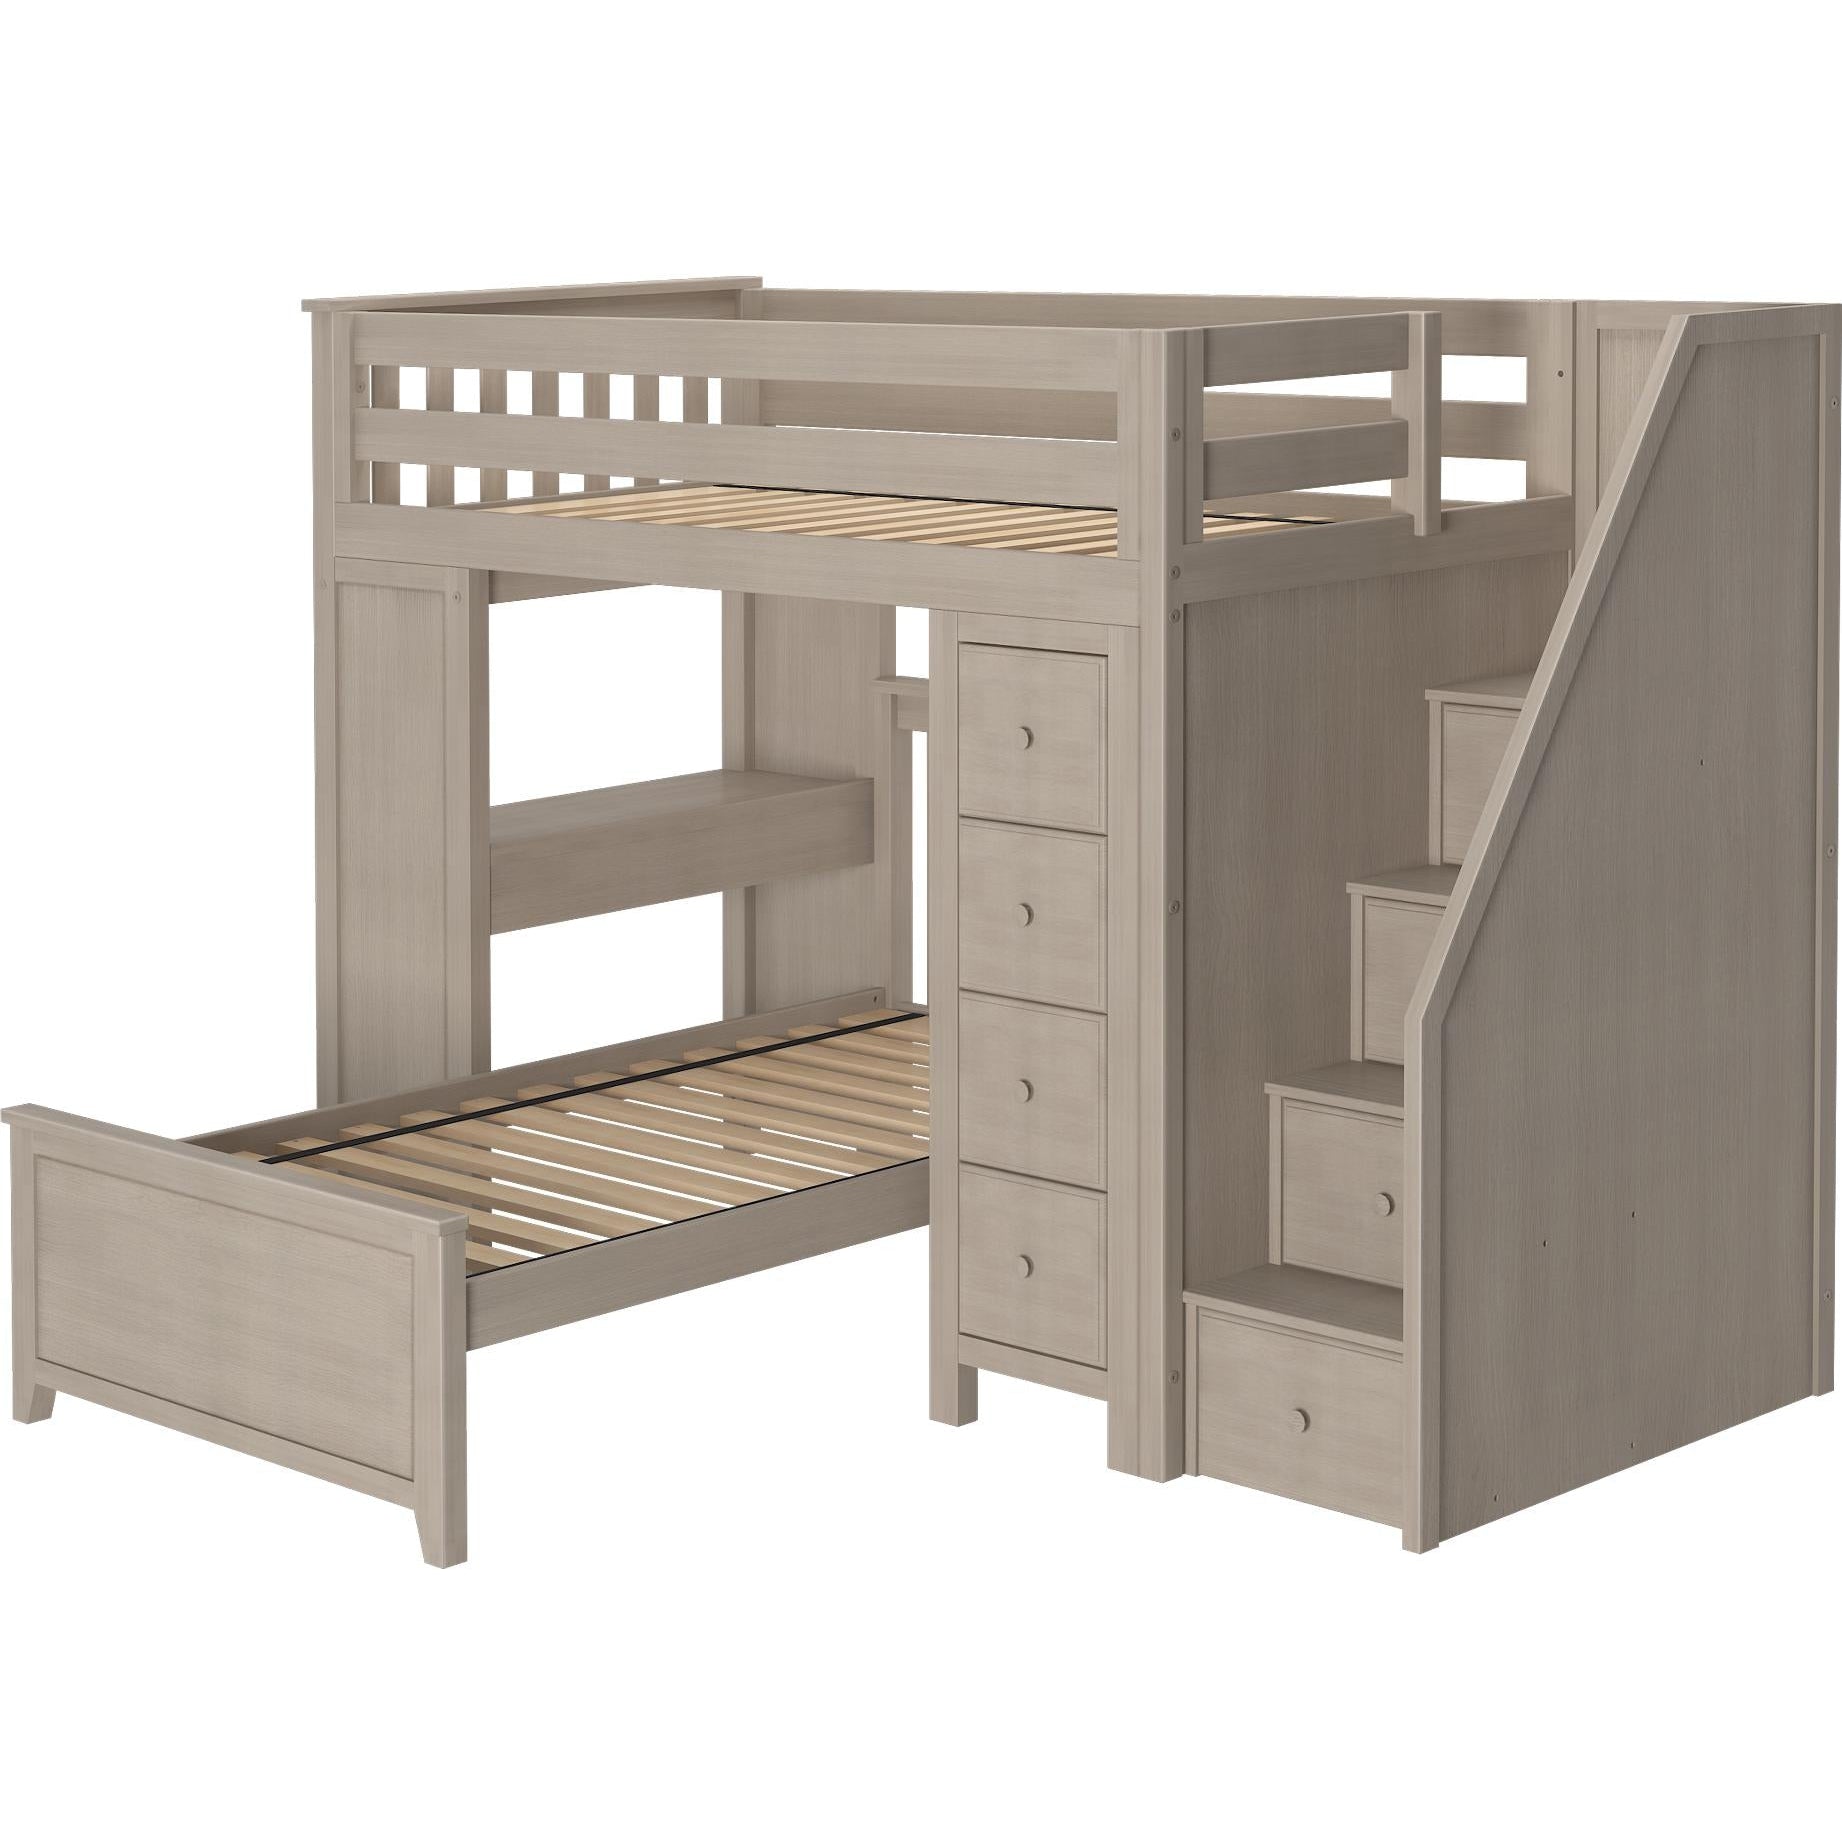 Jackpot Deluxe Chester Staircase Loft Bed Desk + Dresser + Twin Bed